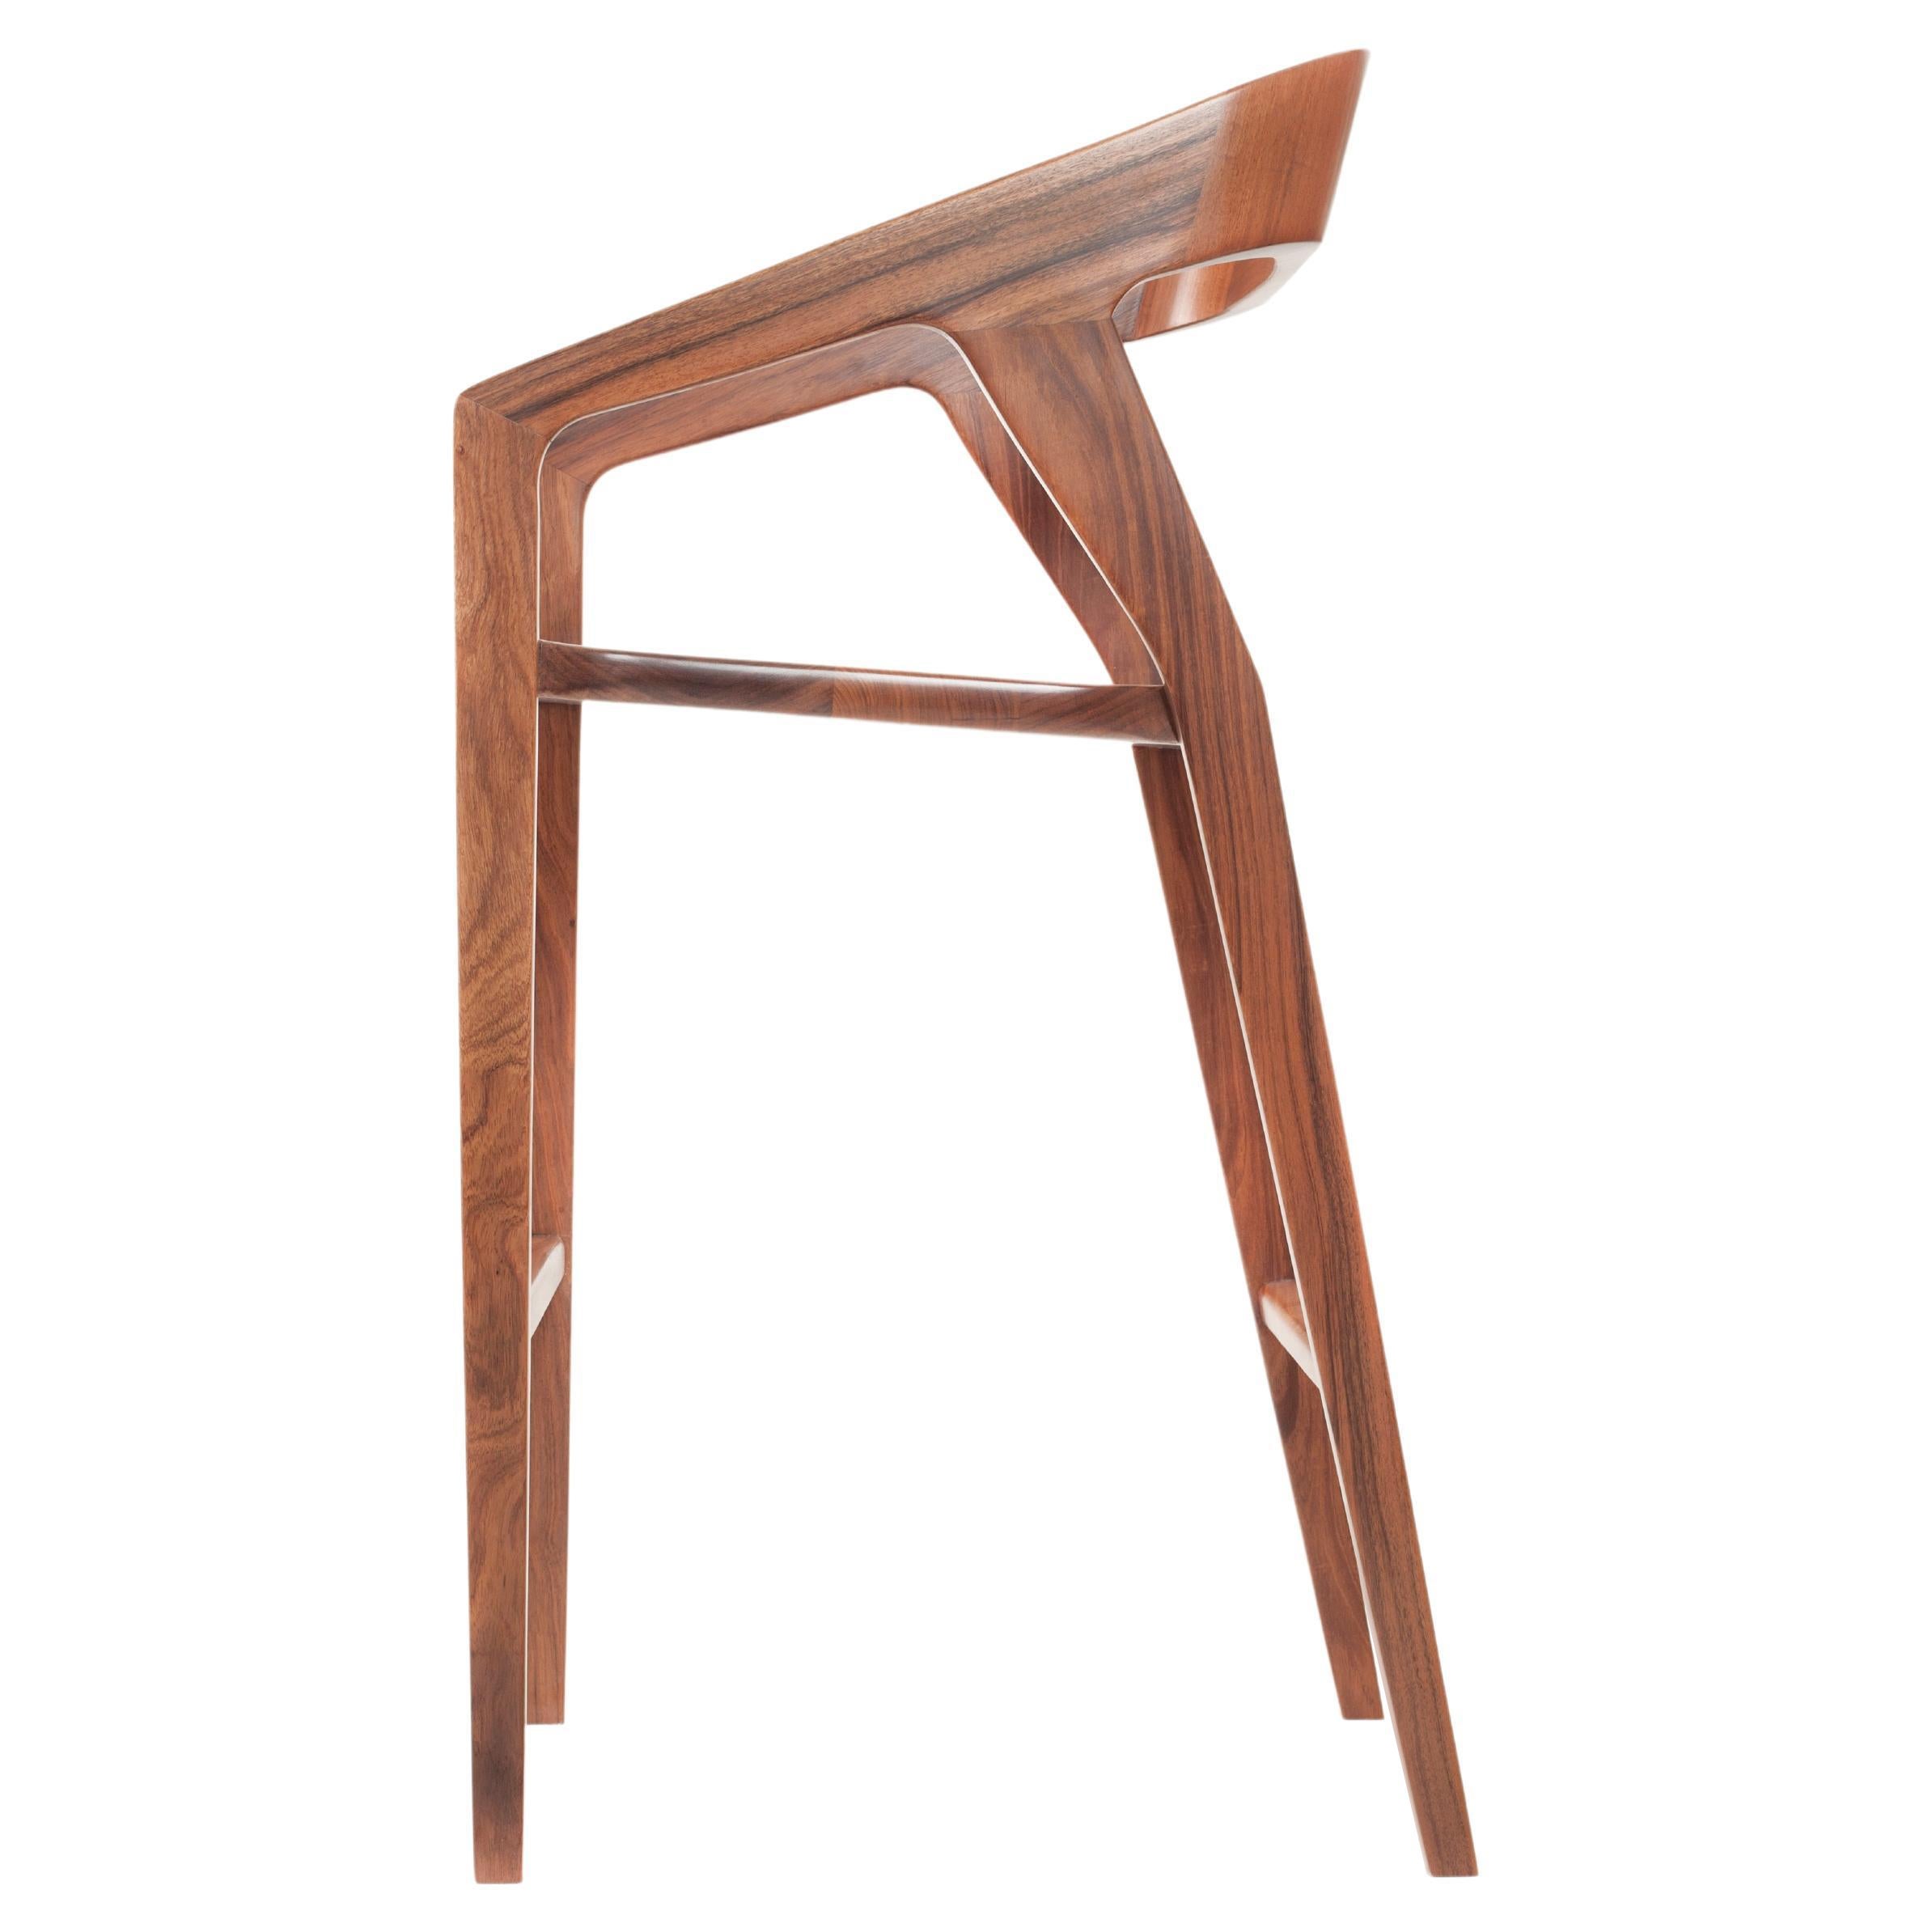 Minimalist Modern Counter Stool in Mexican Hardwood, '2 in Stock'